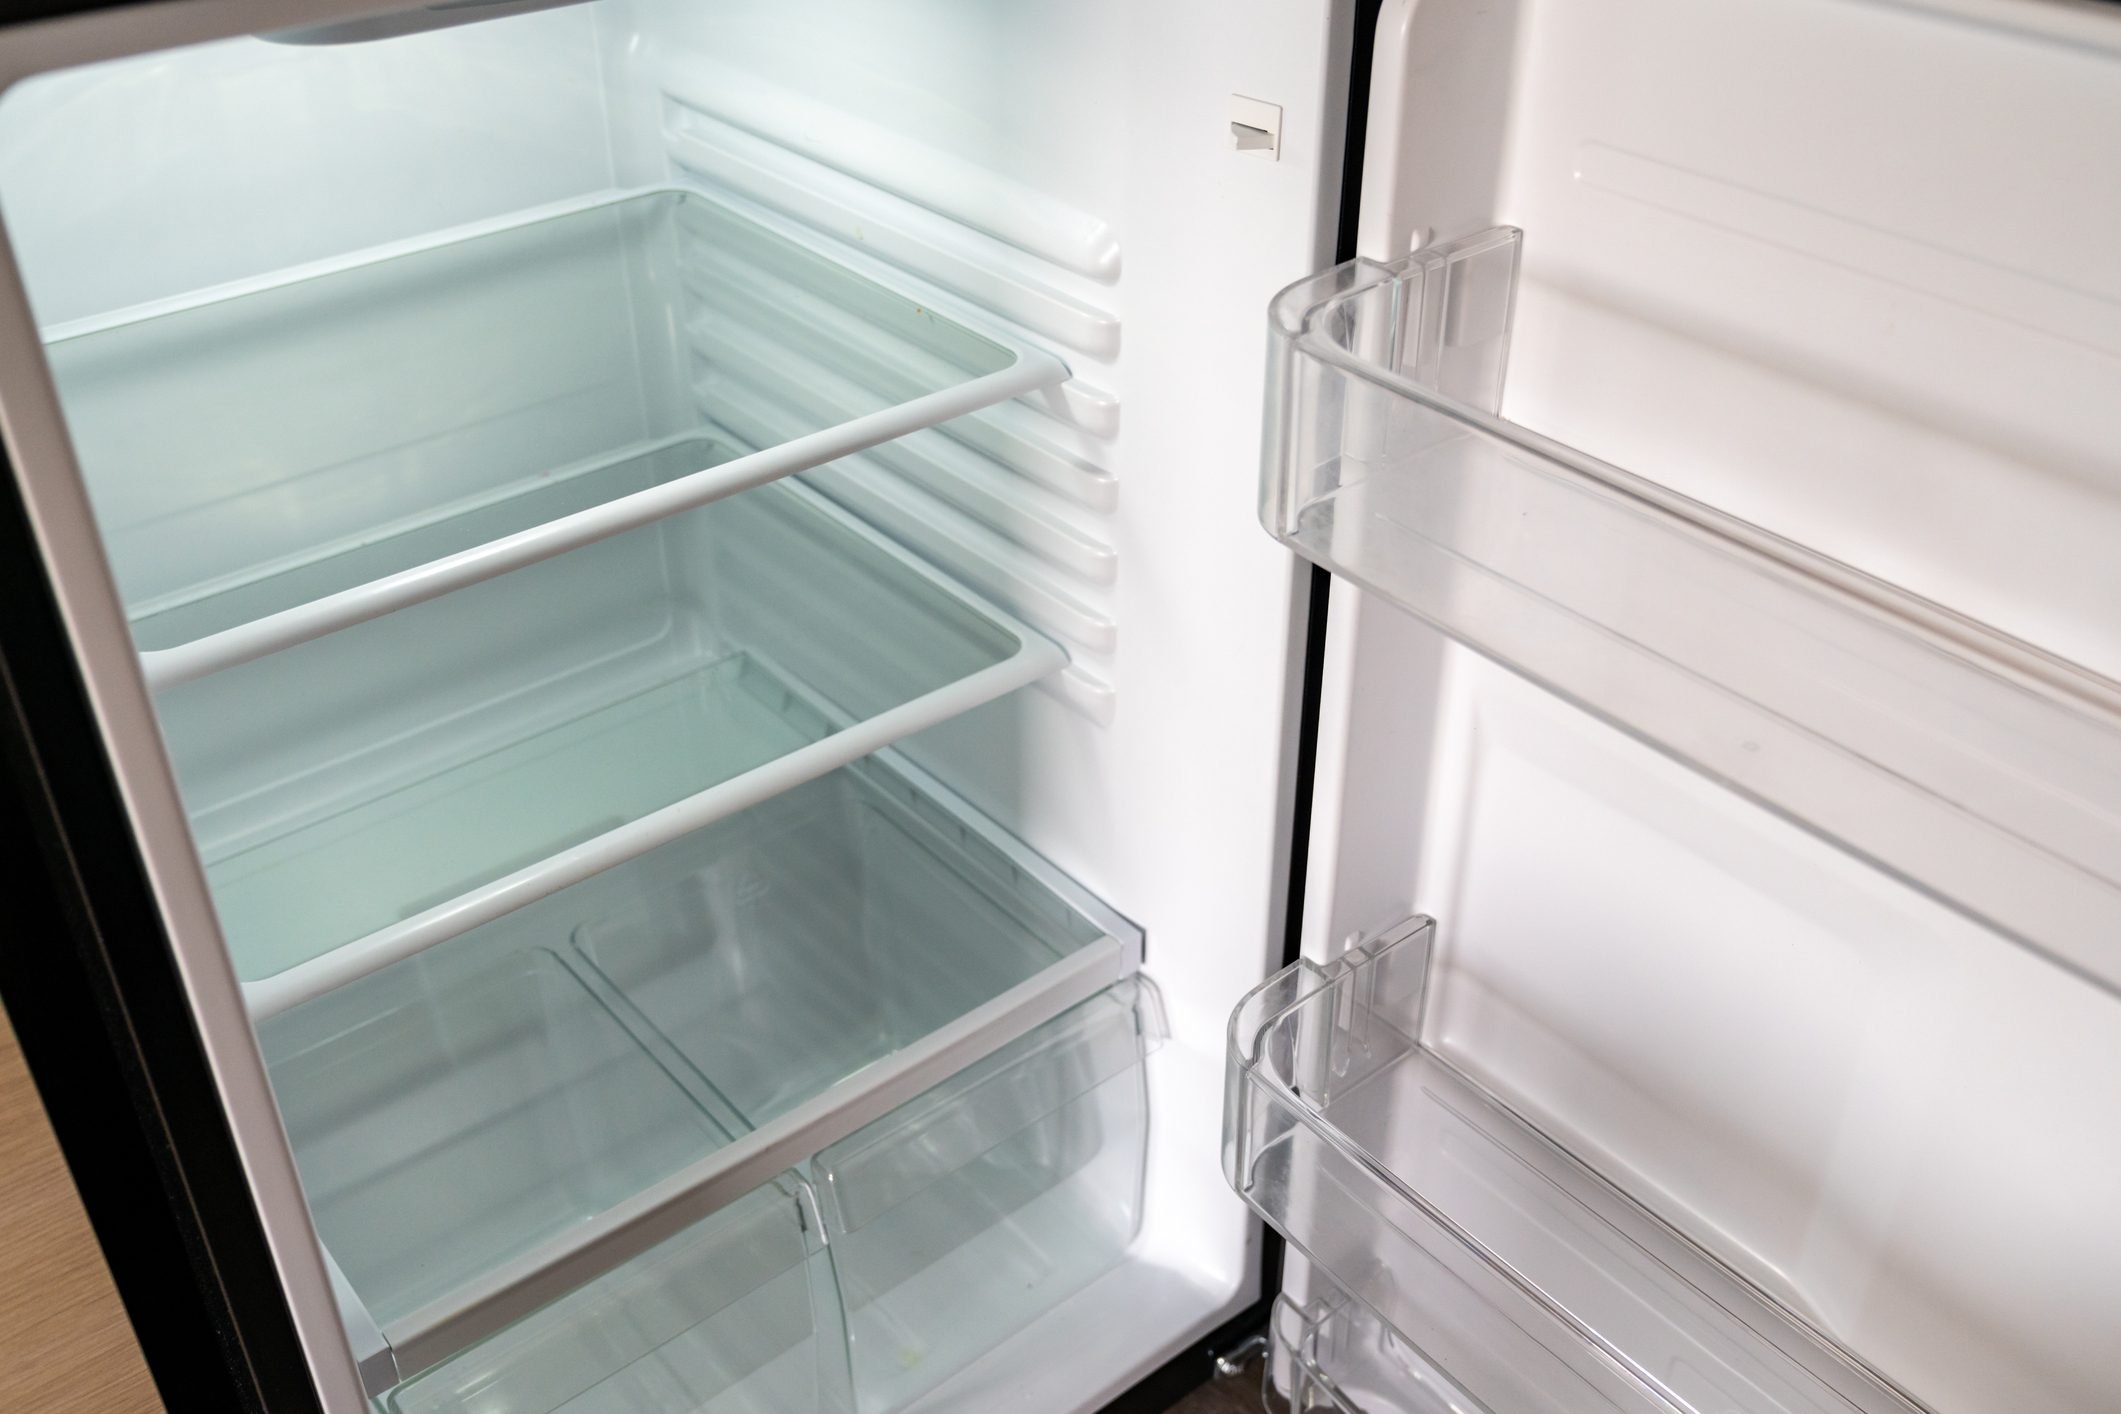 8 Things You Can Do to Help Avoid Refrigerator Repairs